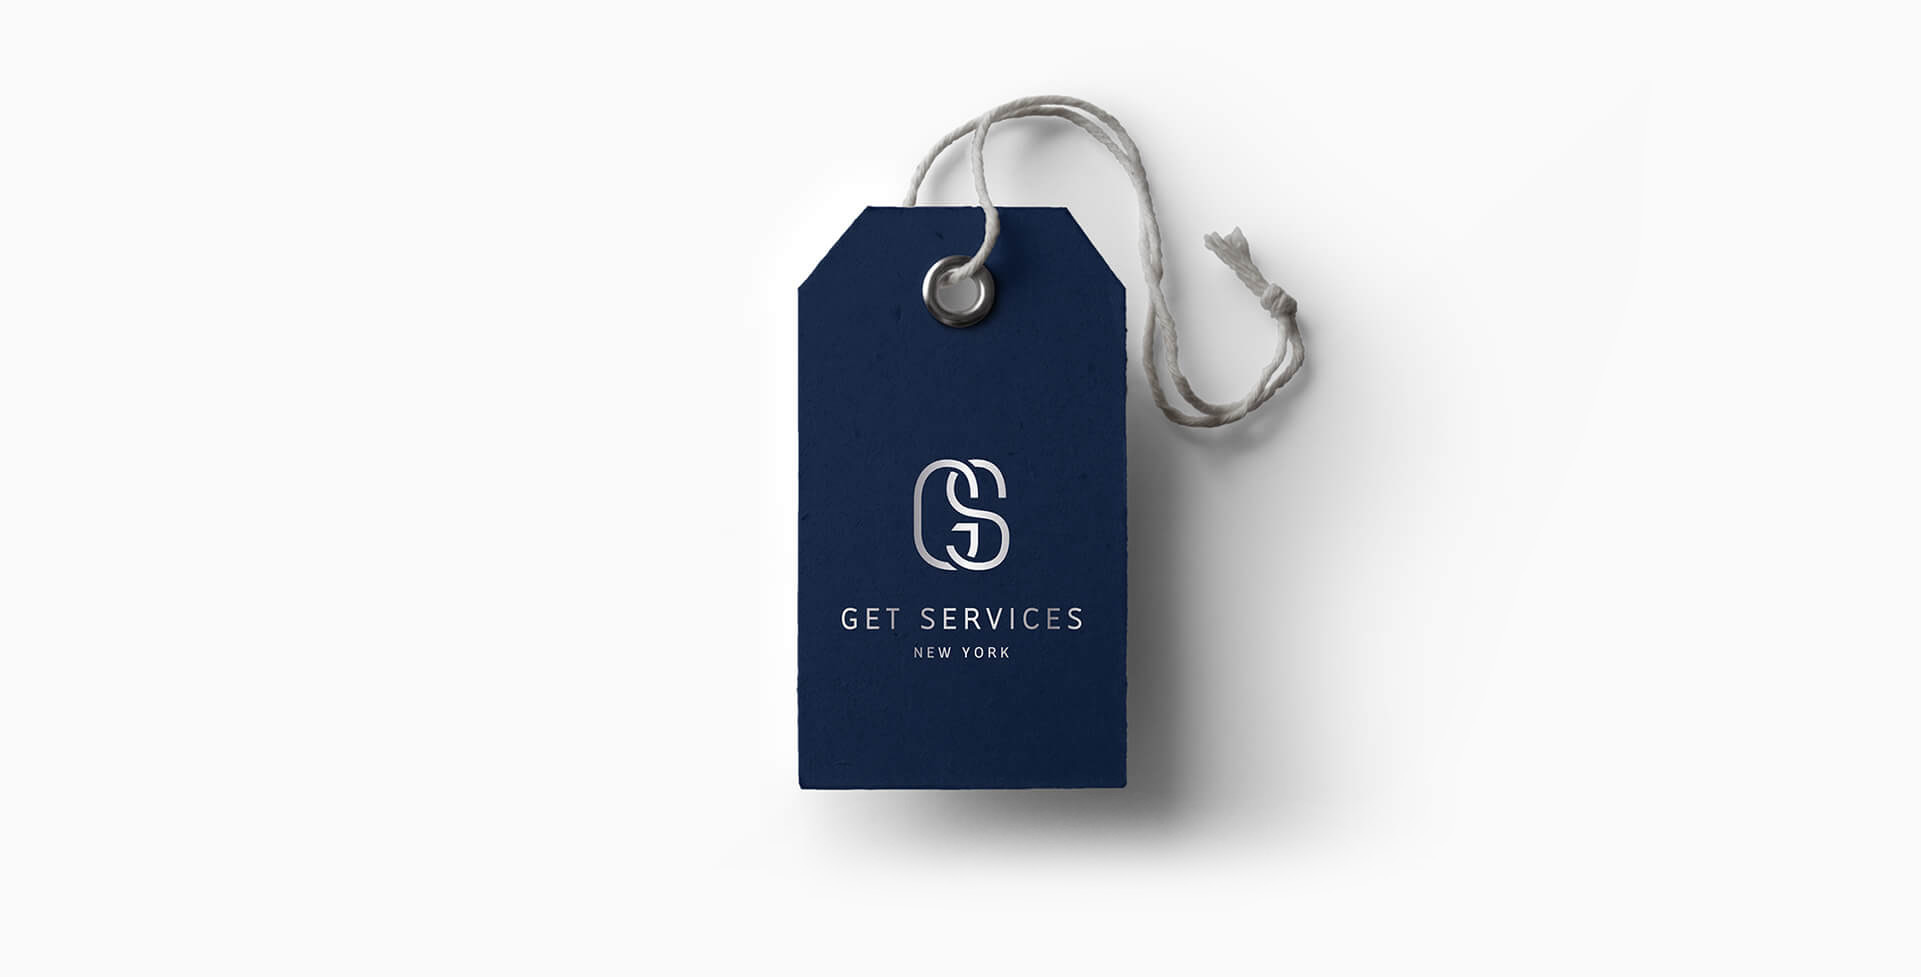 Get Services branded tag